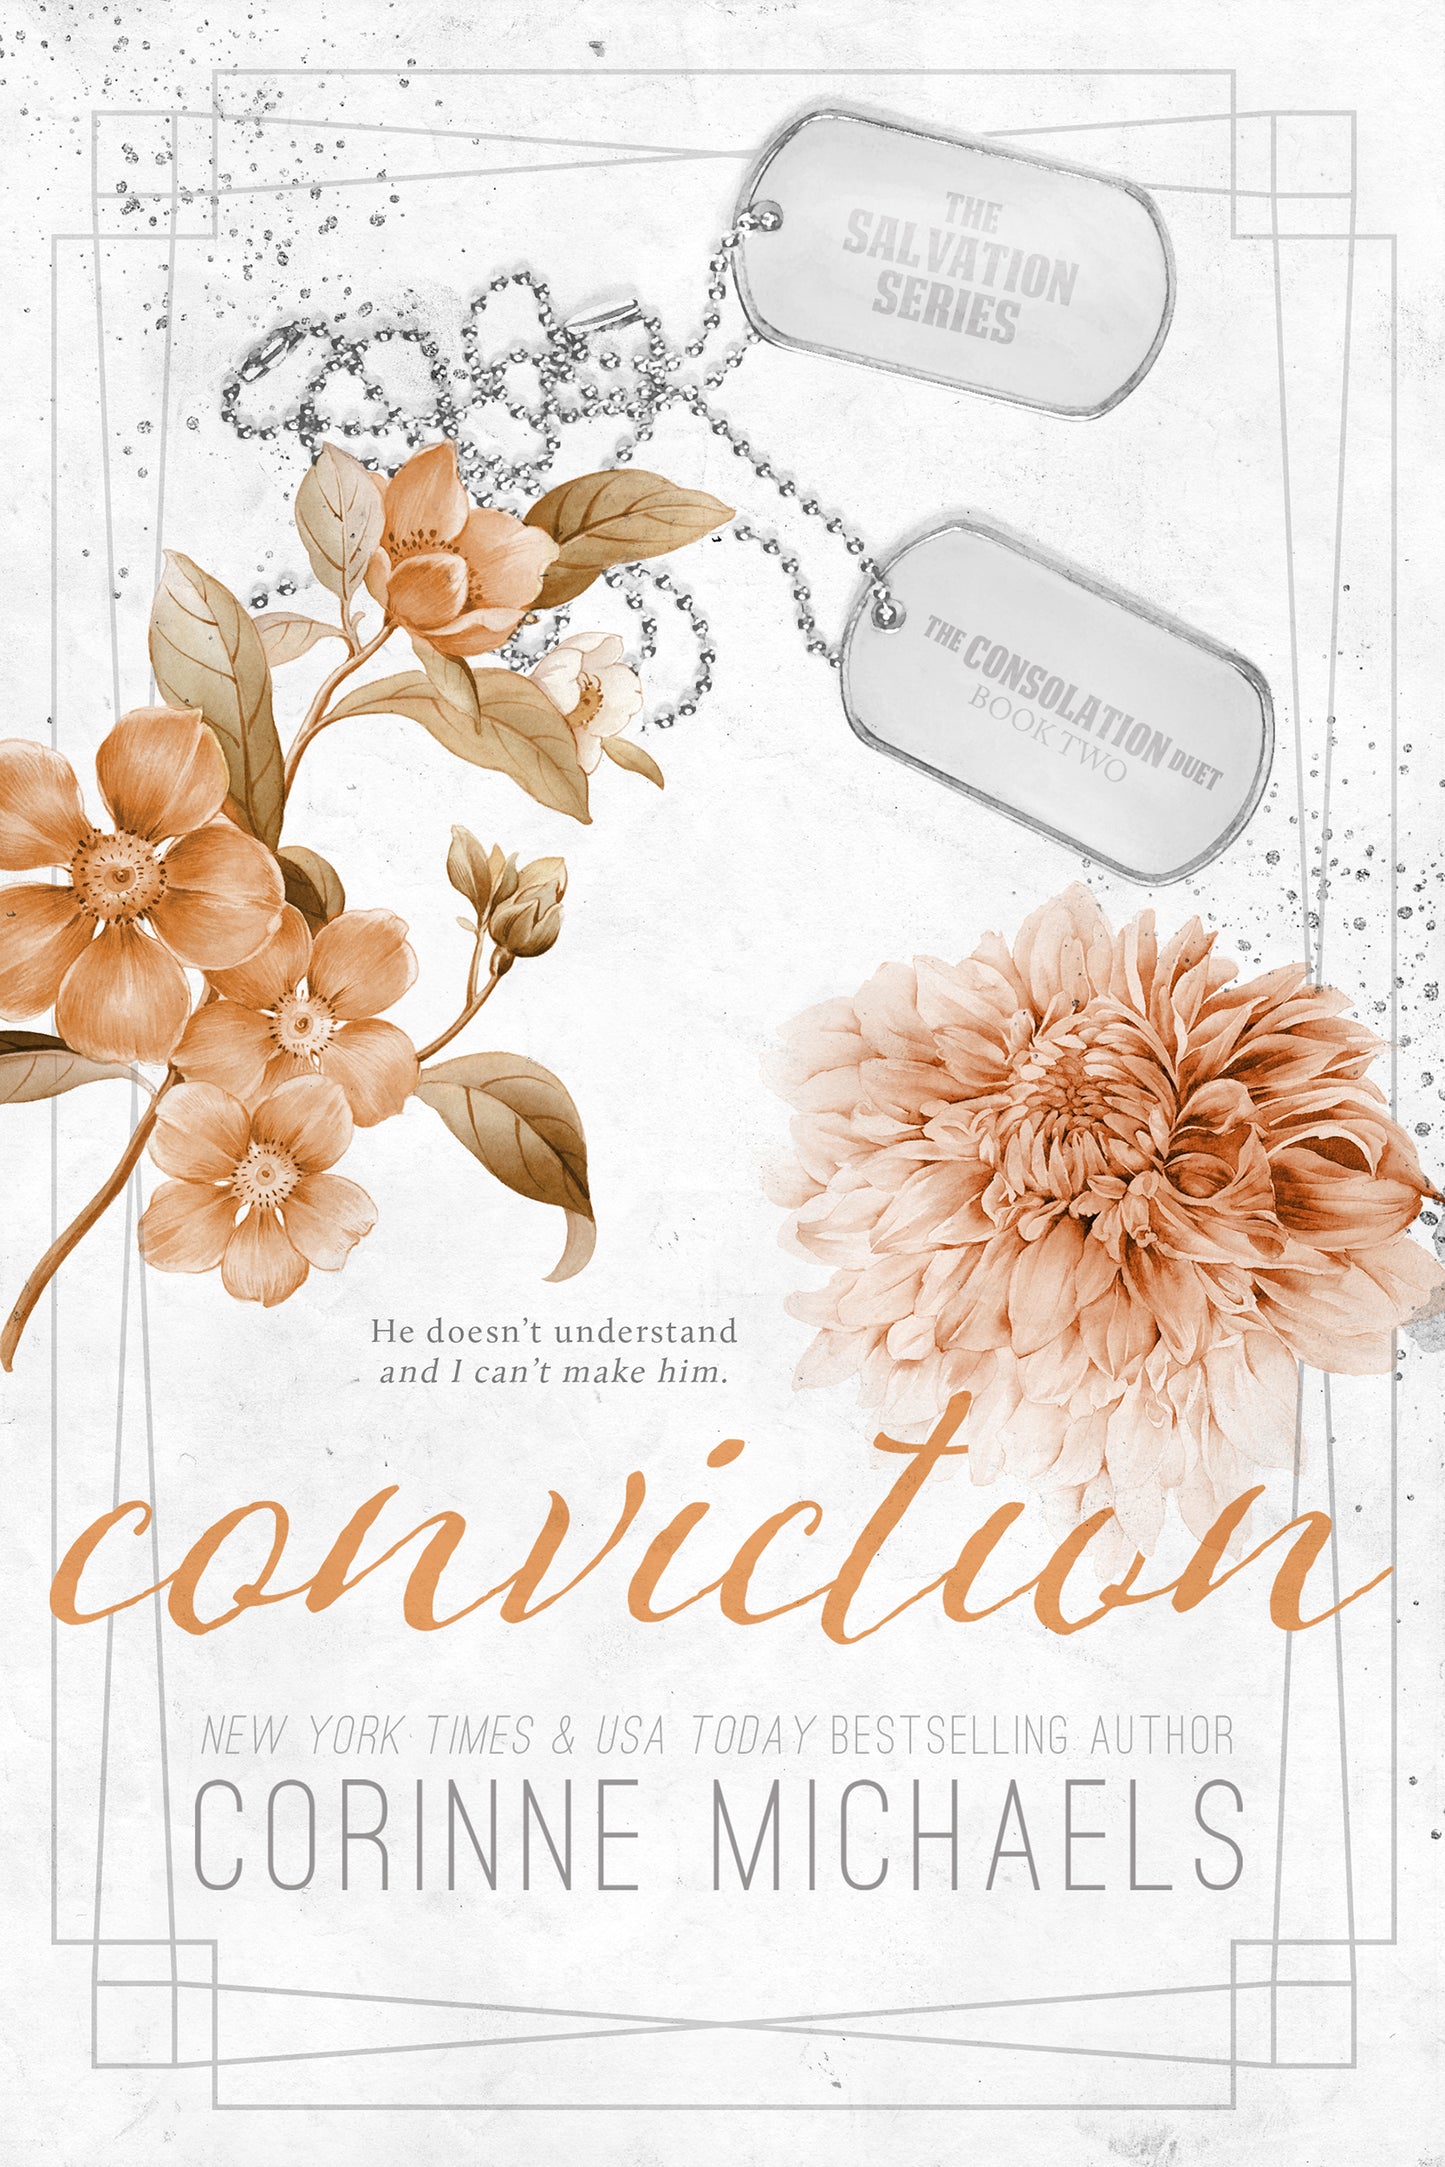 Salvation series by Corinne Michaels